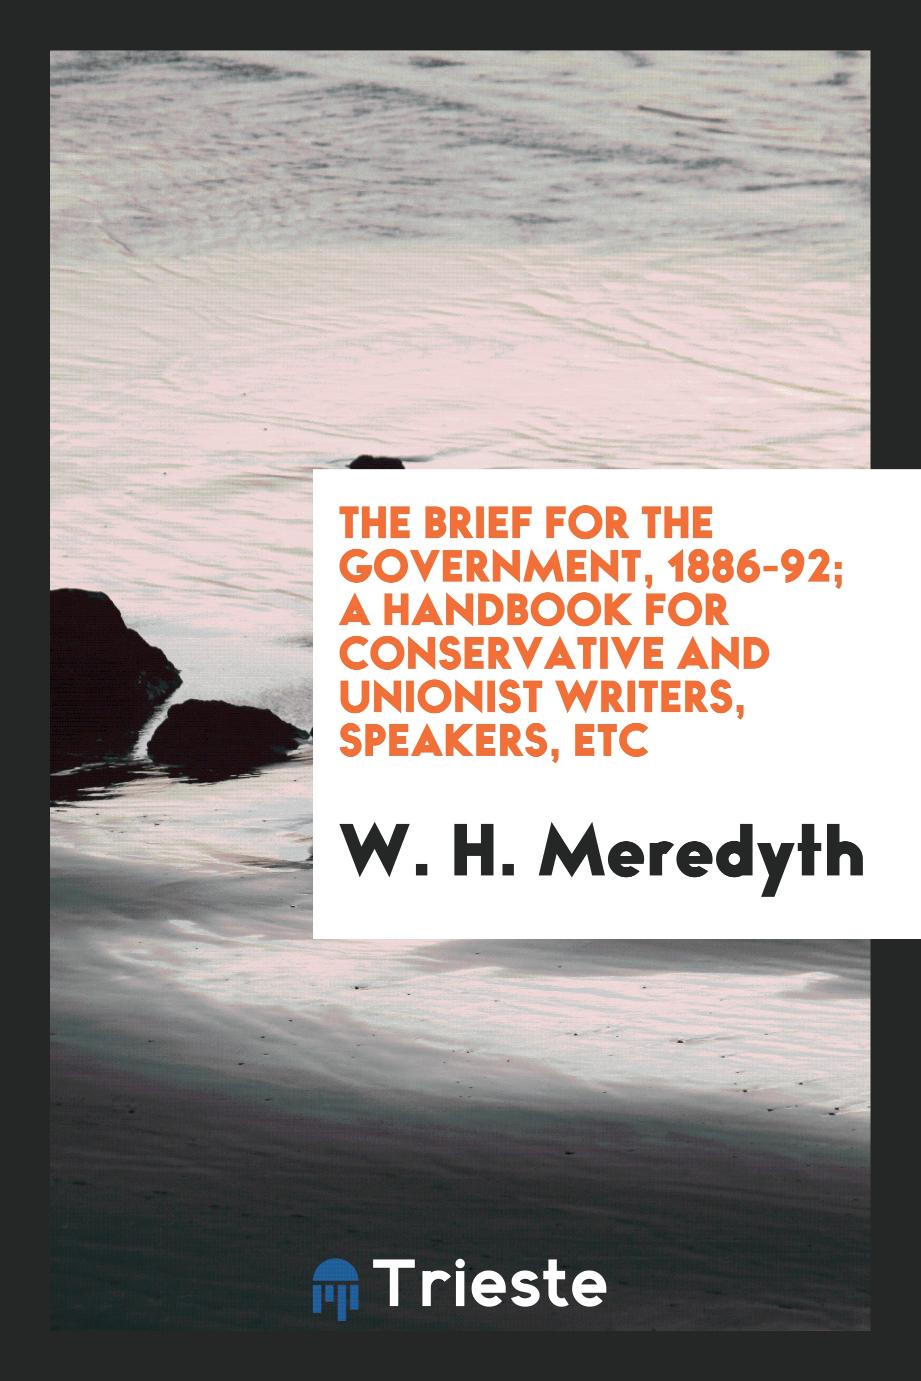 The brief for the government, 1886-92; a handbook for Conservative and Unionist writers, speakers, etc